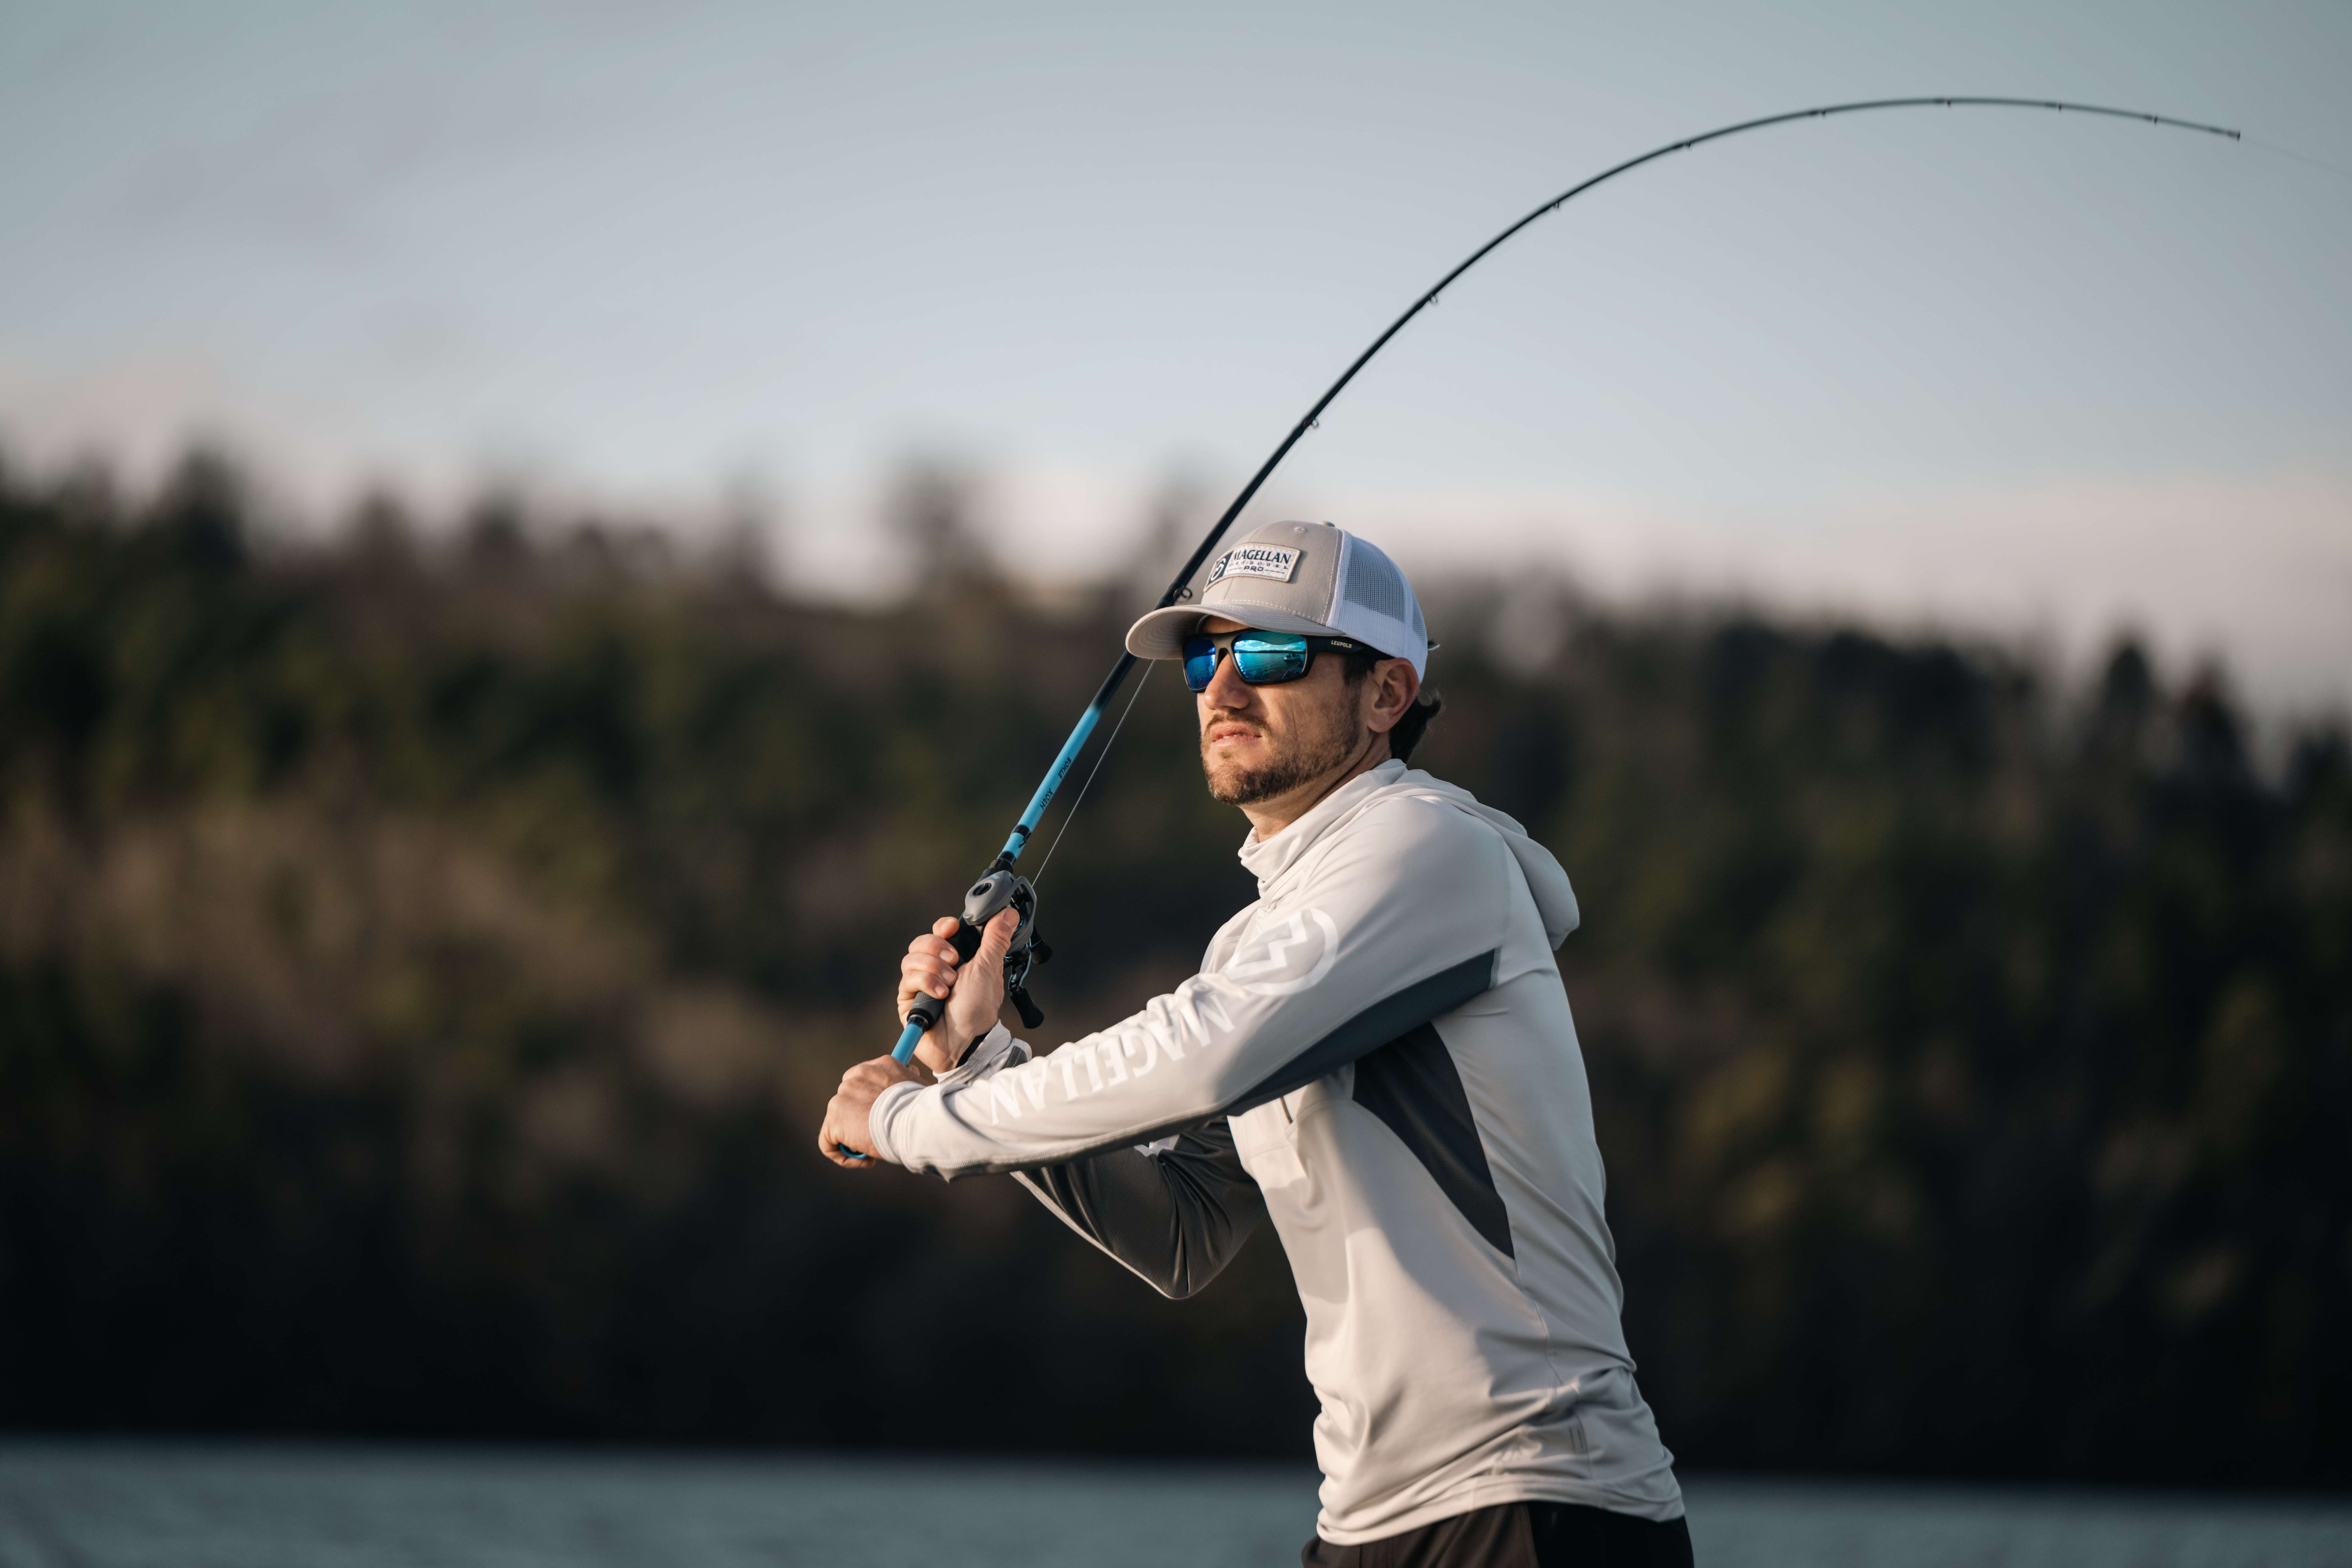 4 Ways to Cast a Fishing Pole - wikiHow